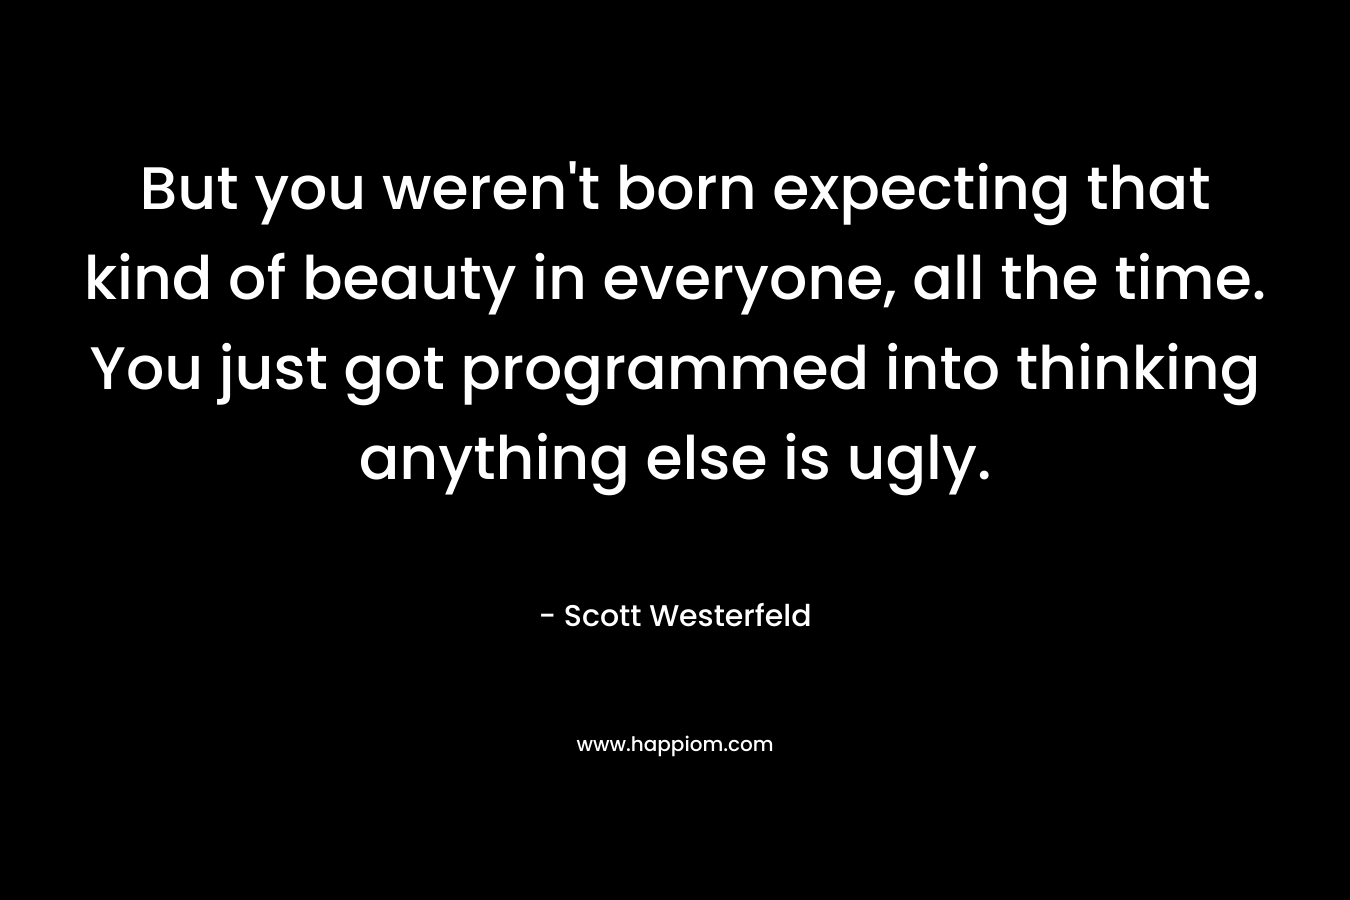 But you weren’t born expecting that kind of beauty in everyone, all the time. You just got programmed into thinking anything else is ugly. – Scott Westerfeld